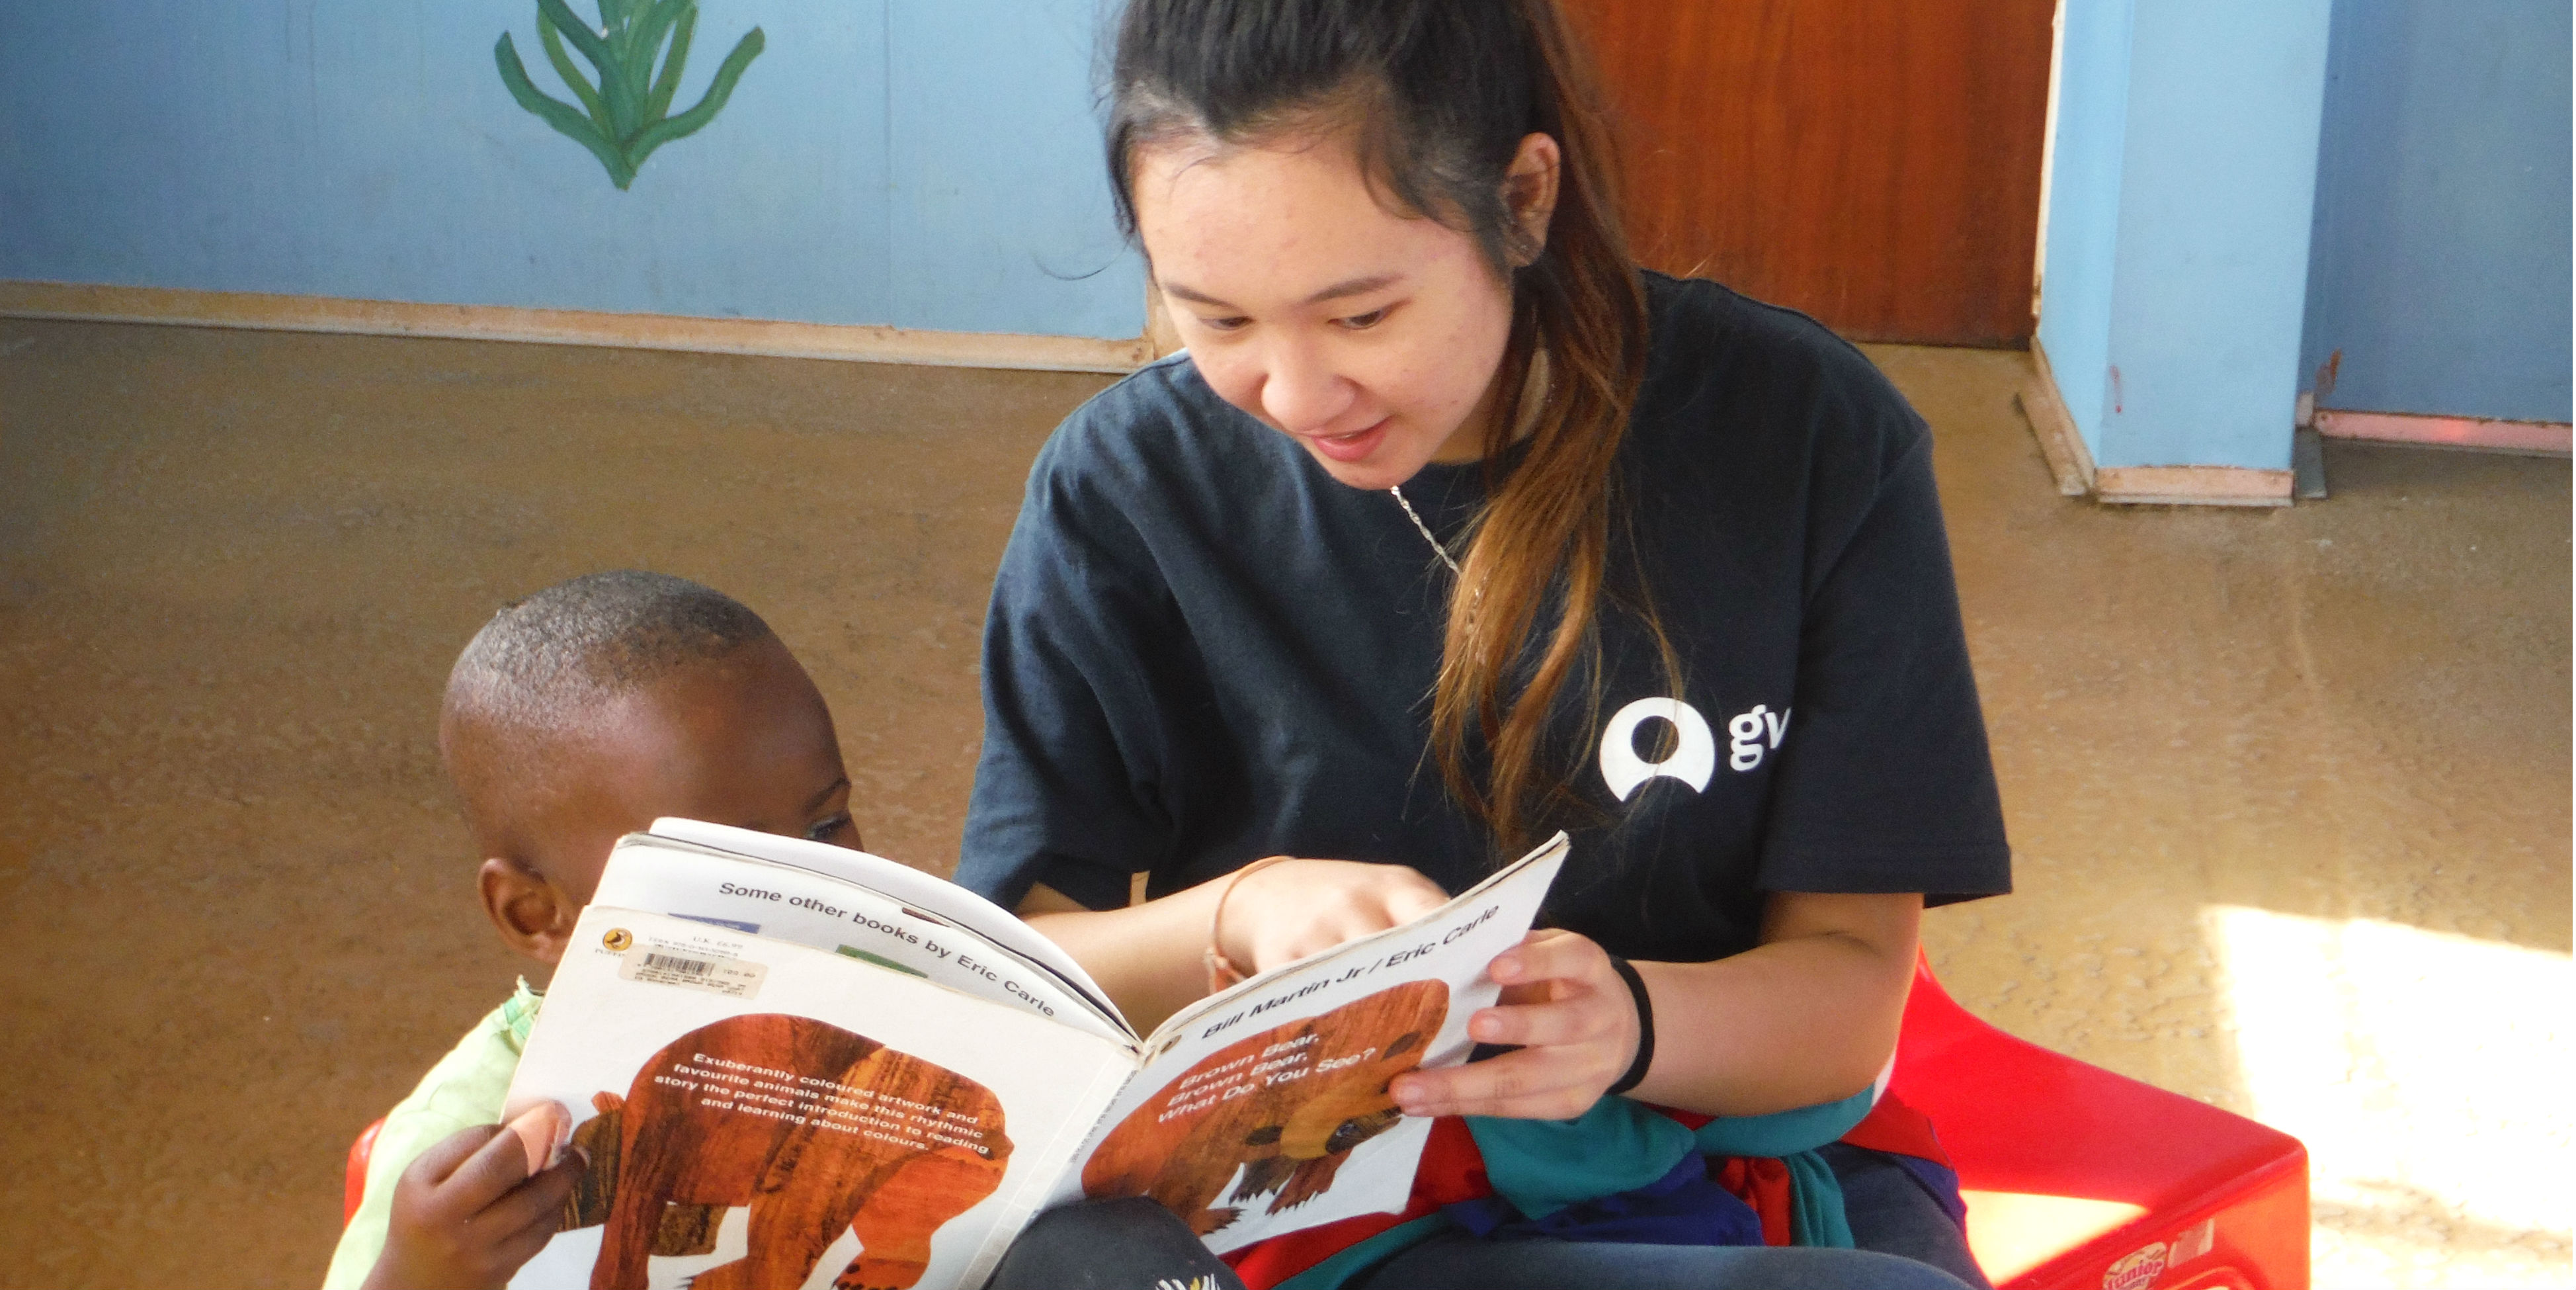 A GVI participant leads a learner through their reading while volunteering in Cape Town.